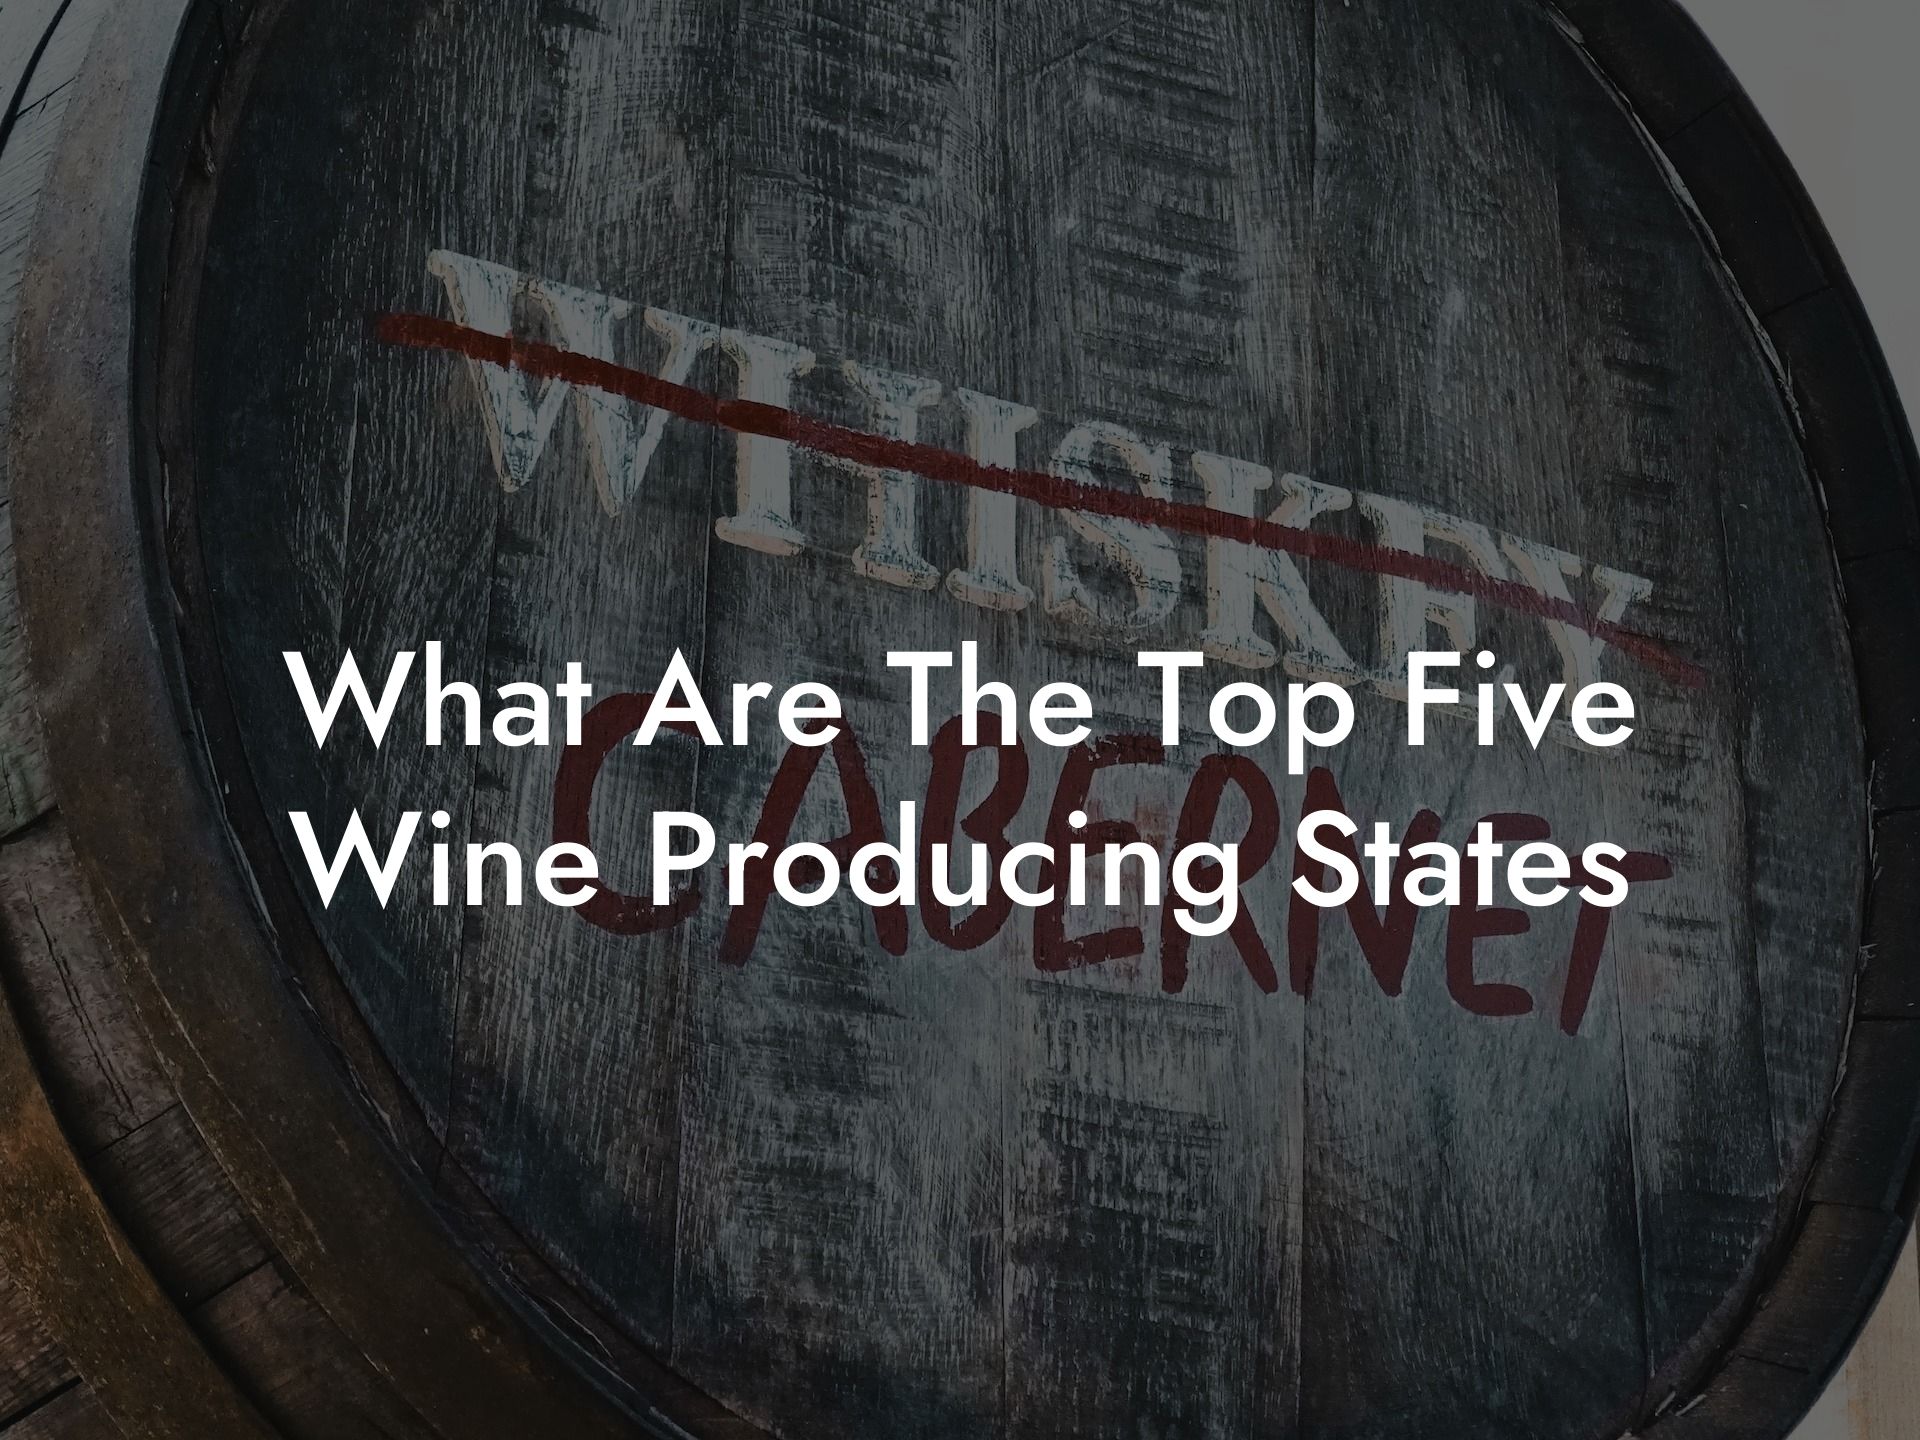 What Are The Top Five Wine Producing States